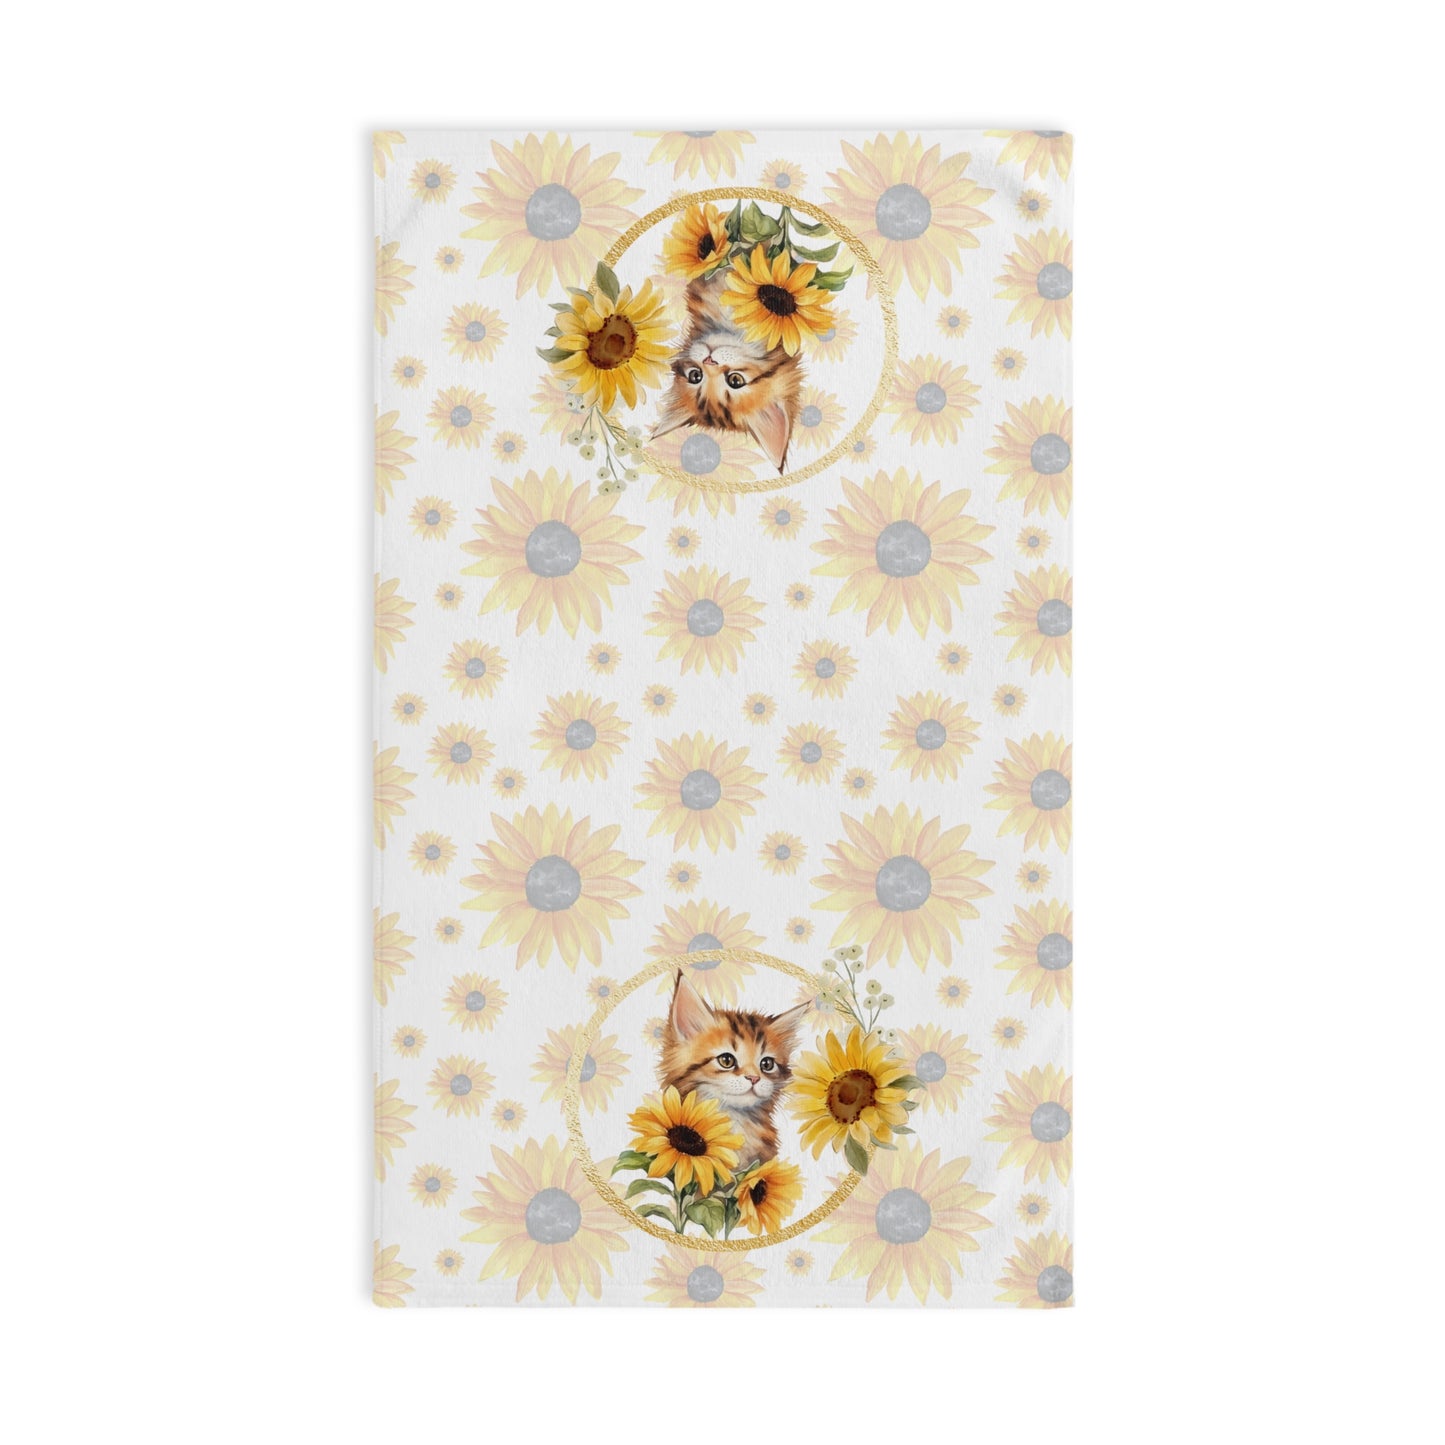 Sunflowers patten with Cute Cat's Design Hand Towel 16″ × 28″